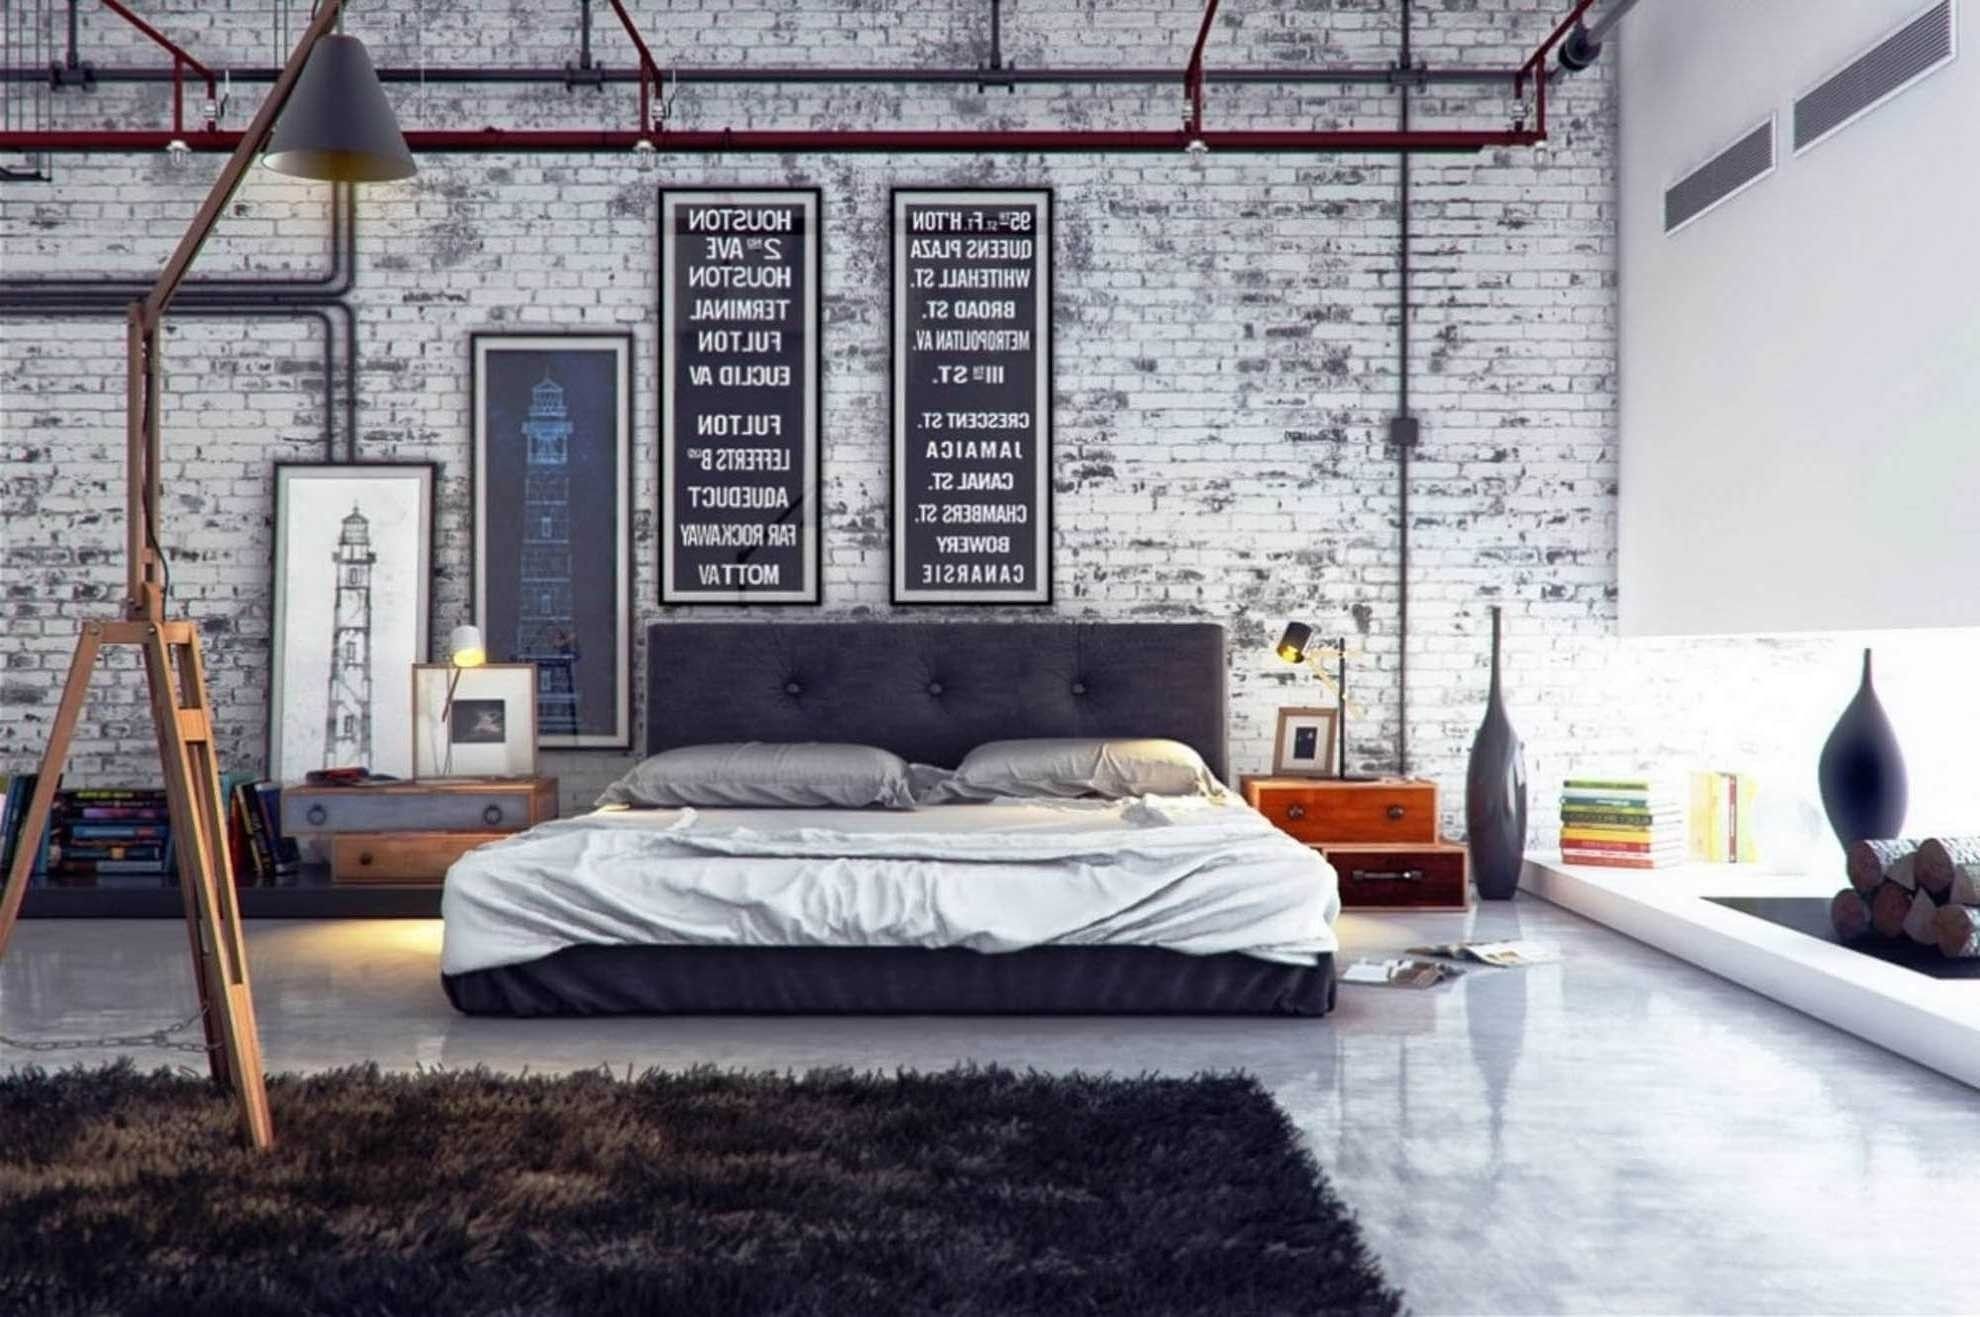 7 Cool Bedroom Man Decor Spectacular Inspiration Wall Art For Men With Regard To Most Recent Wall Art For Men (View 10 of 15)